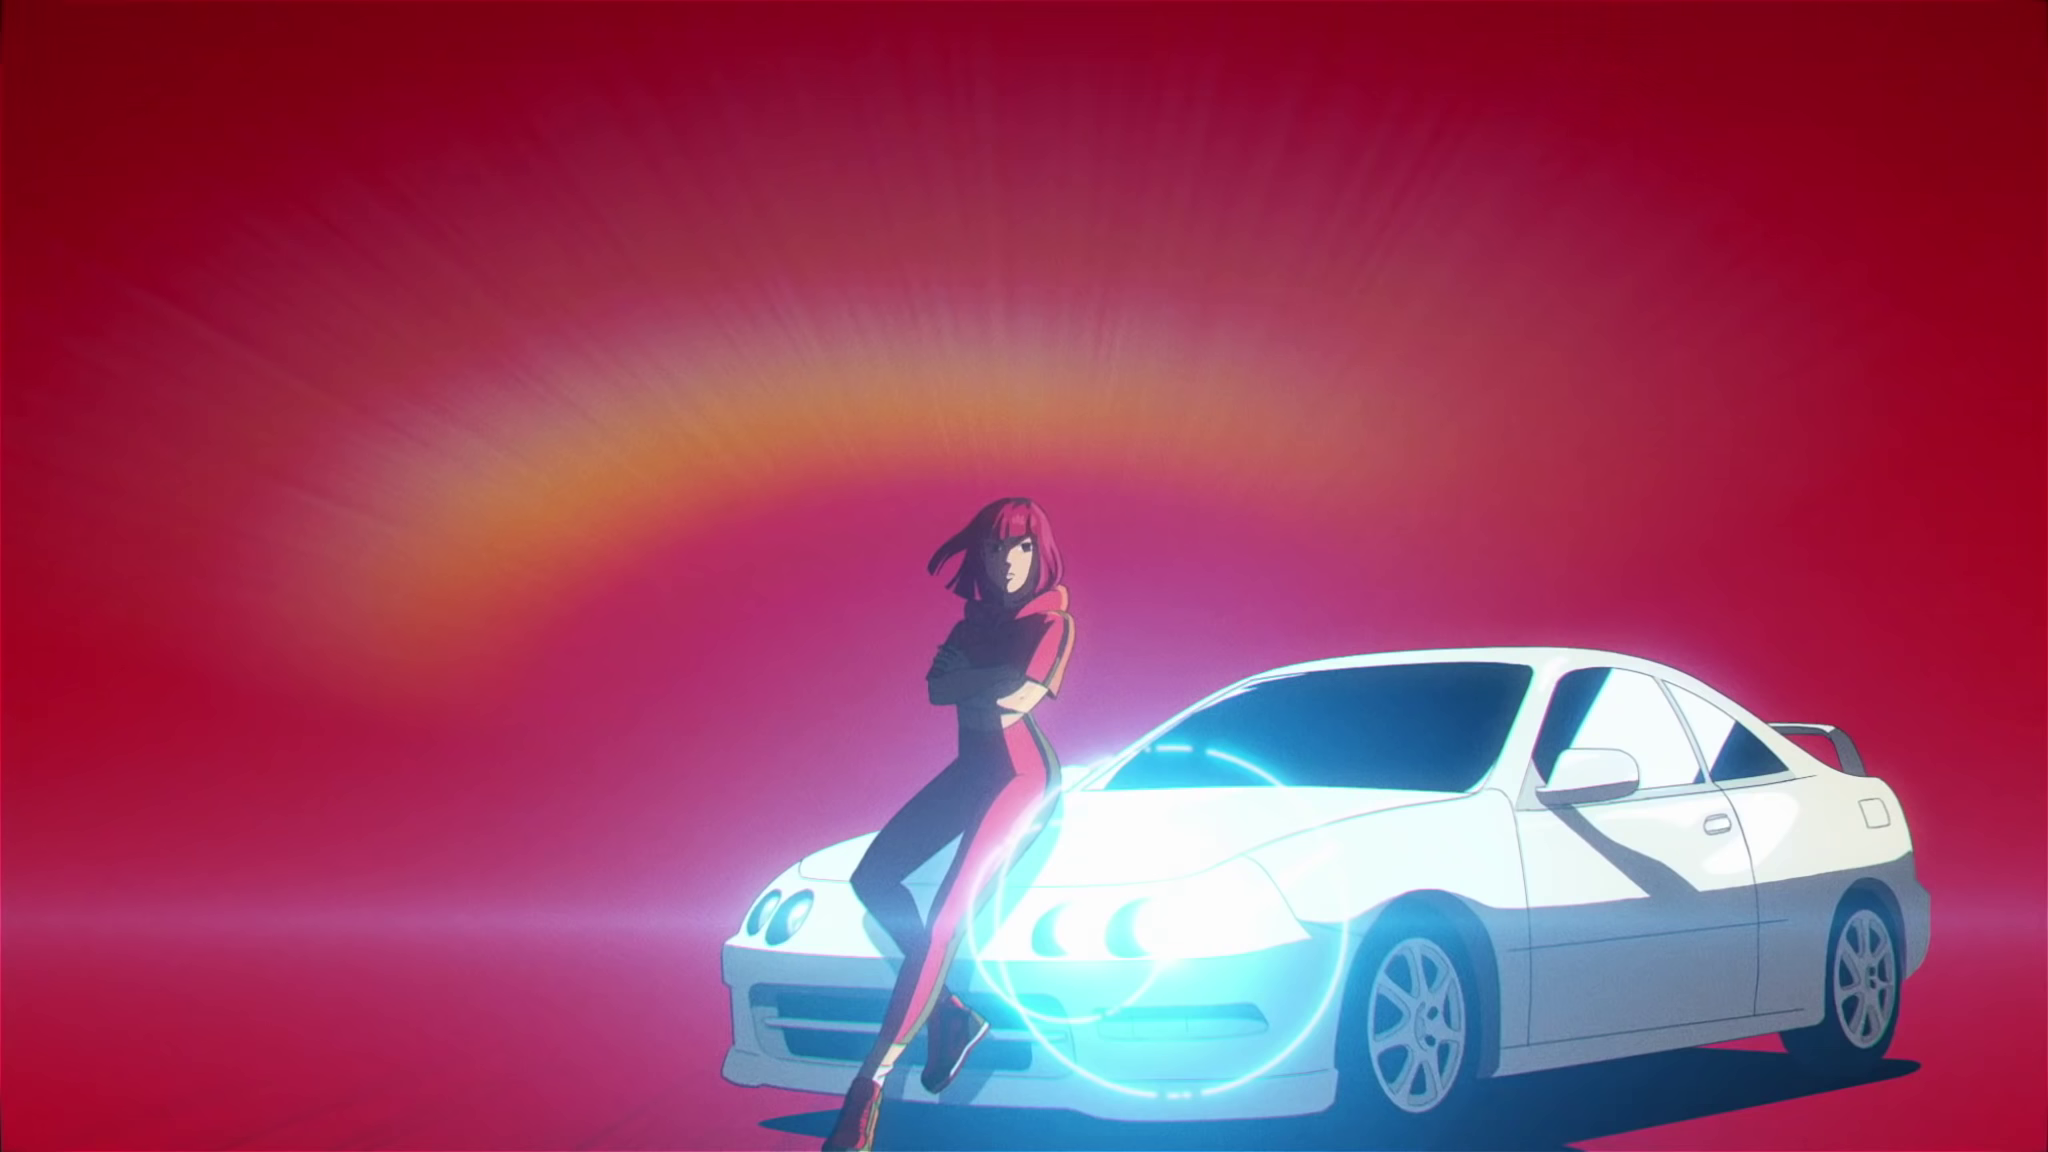 Acura's new marketing campaign is an anime series... : r/cars